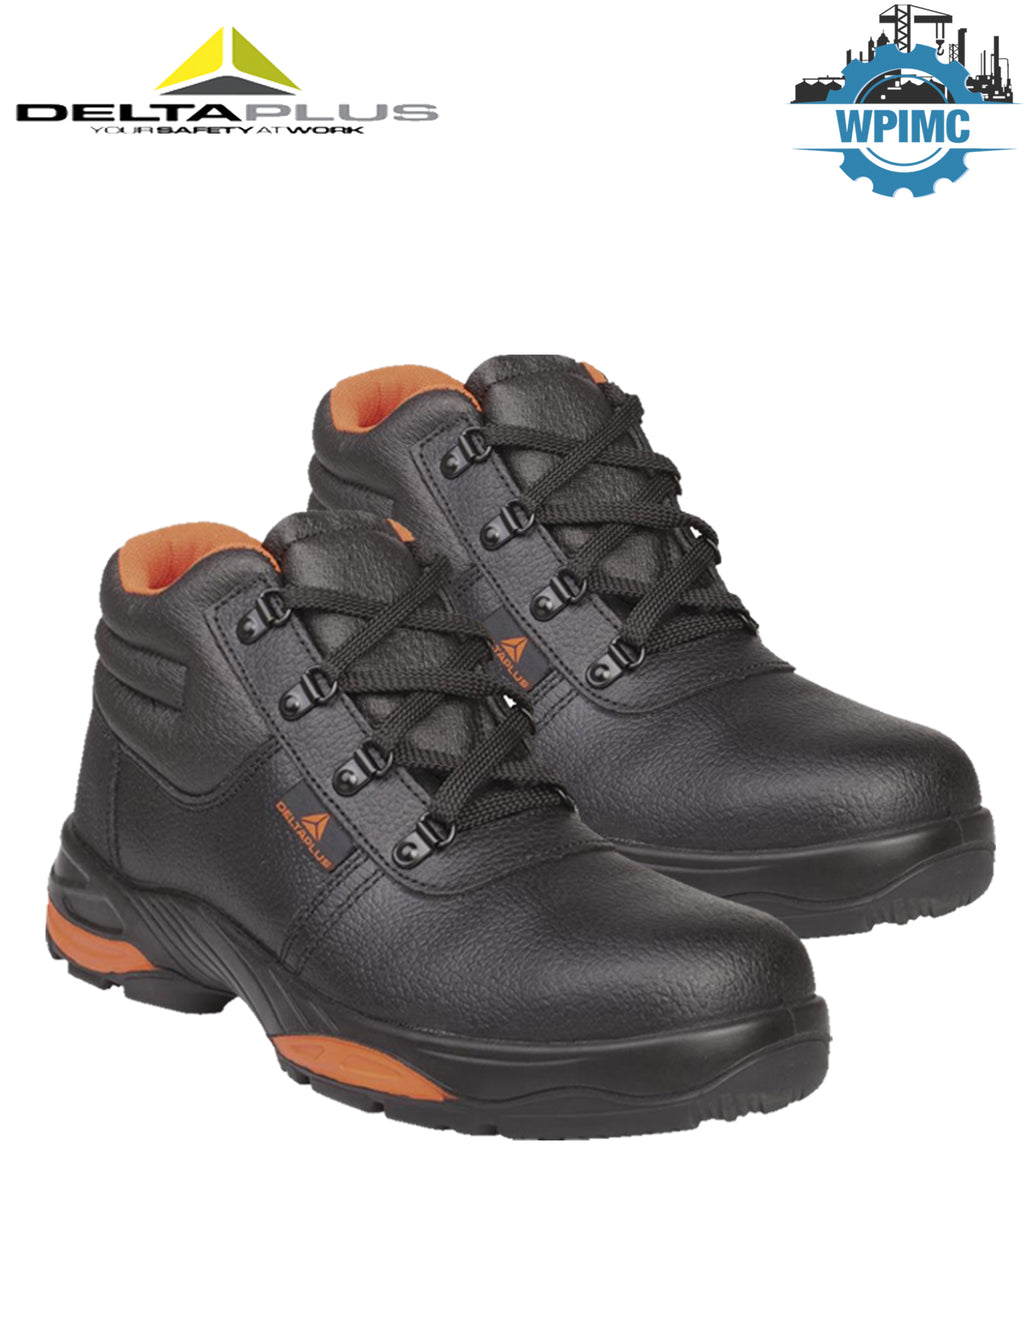 DELTA PLUS SAFETY SHOES SIMBA S3 HIGH SHOE